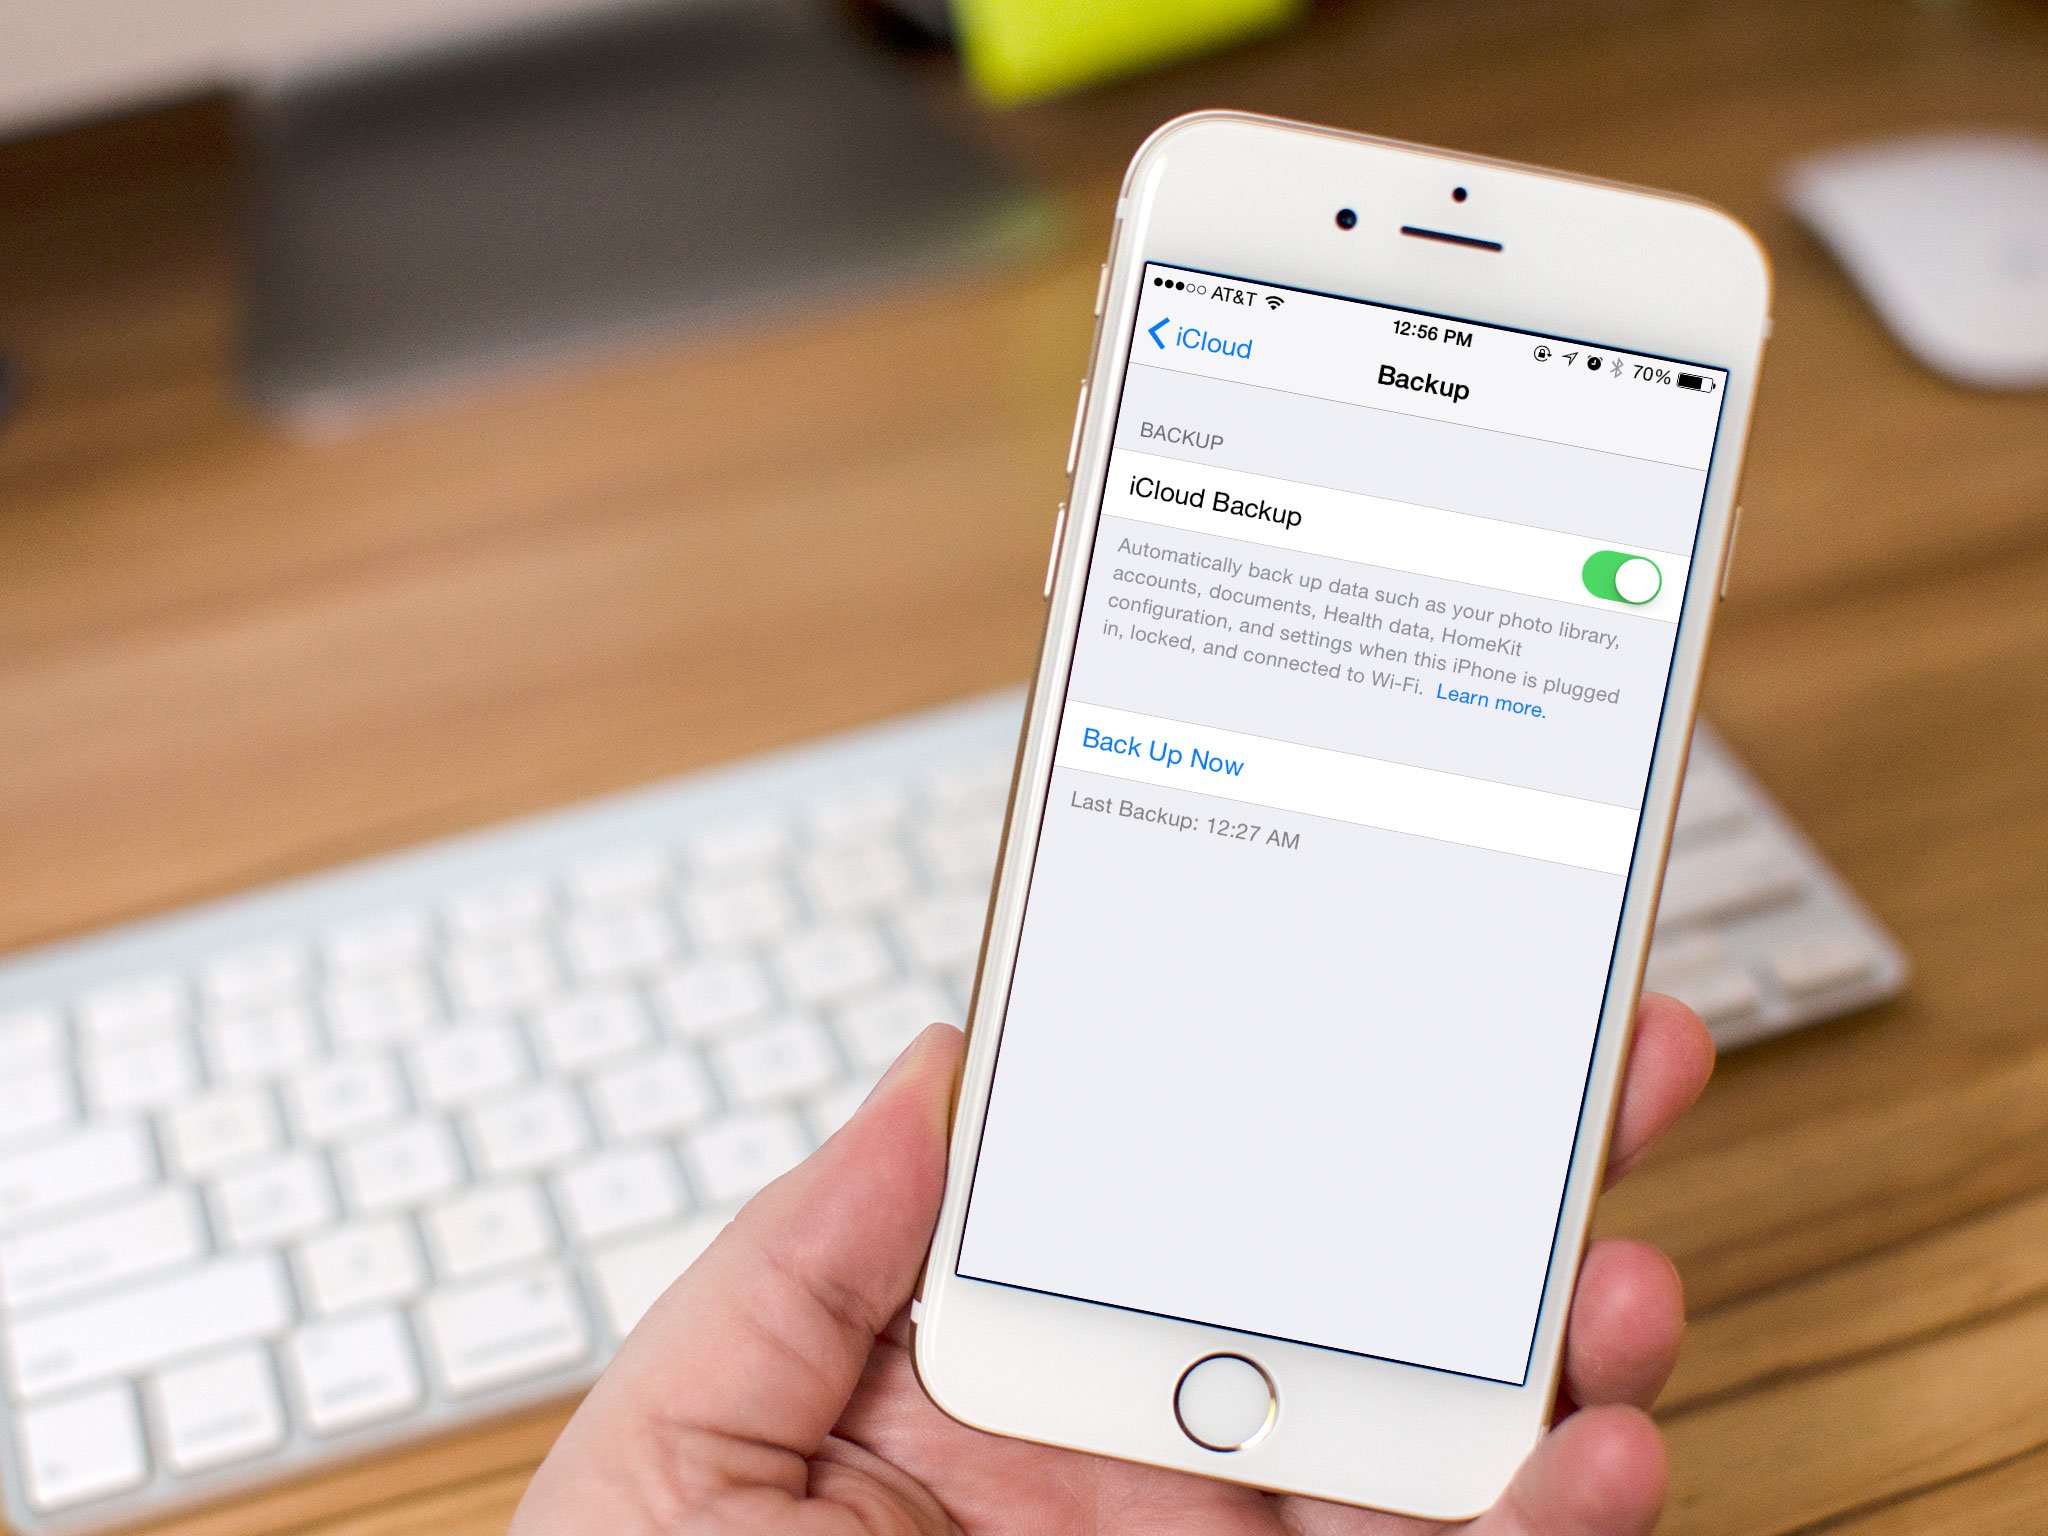 How to manually trigger an iCloud backup on iPhone and iPad